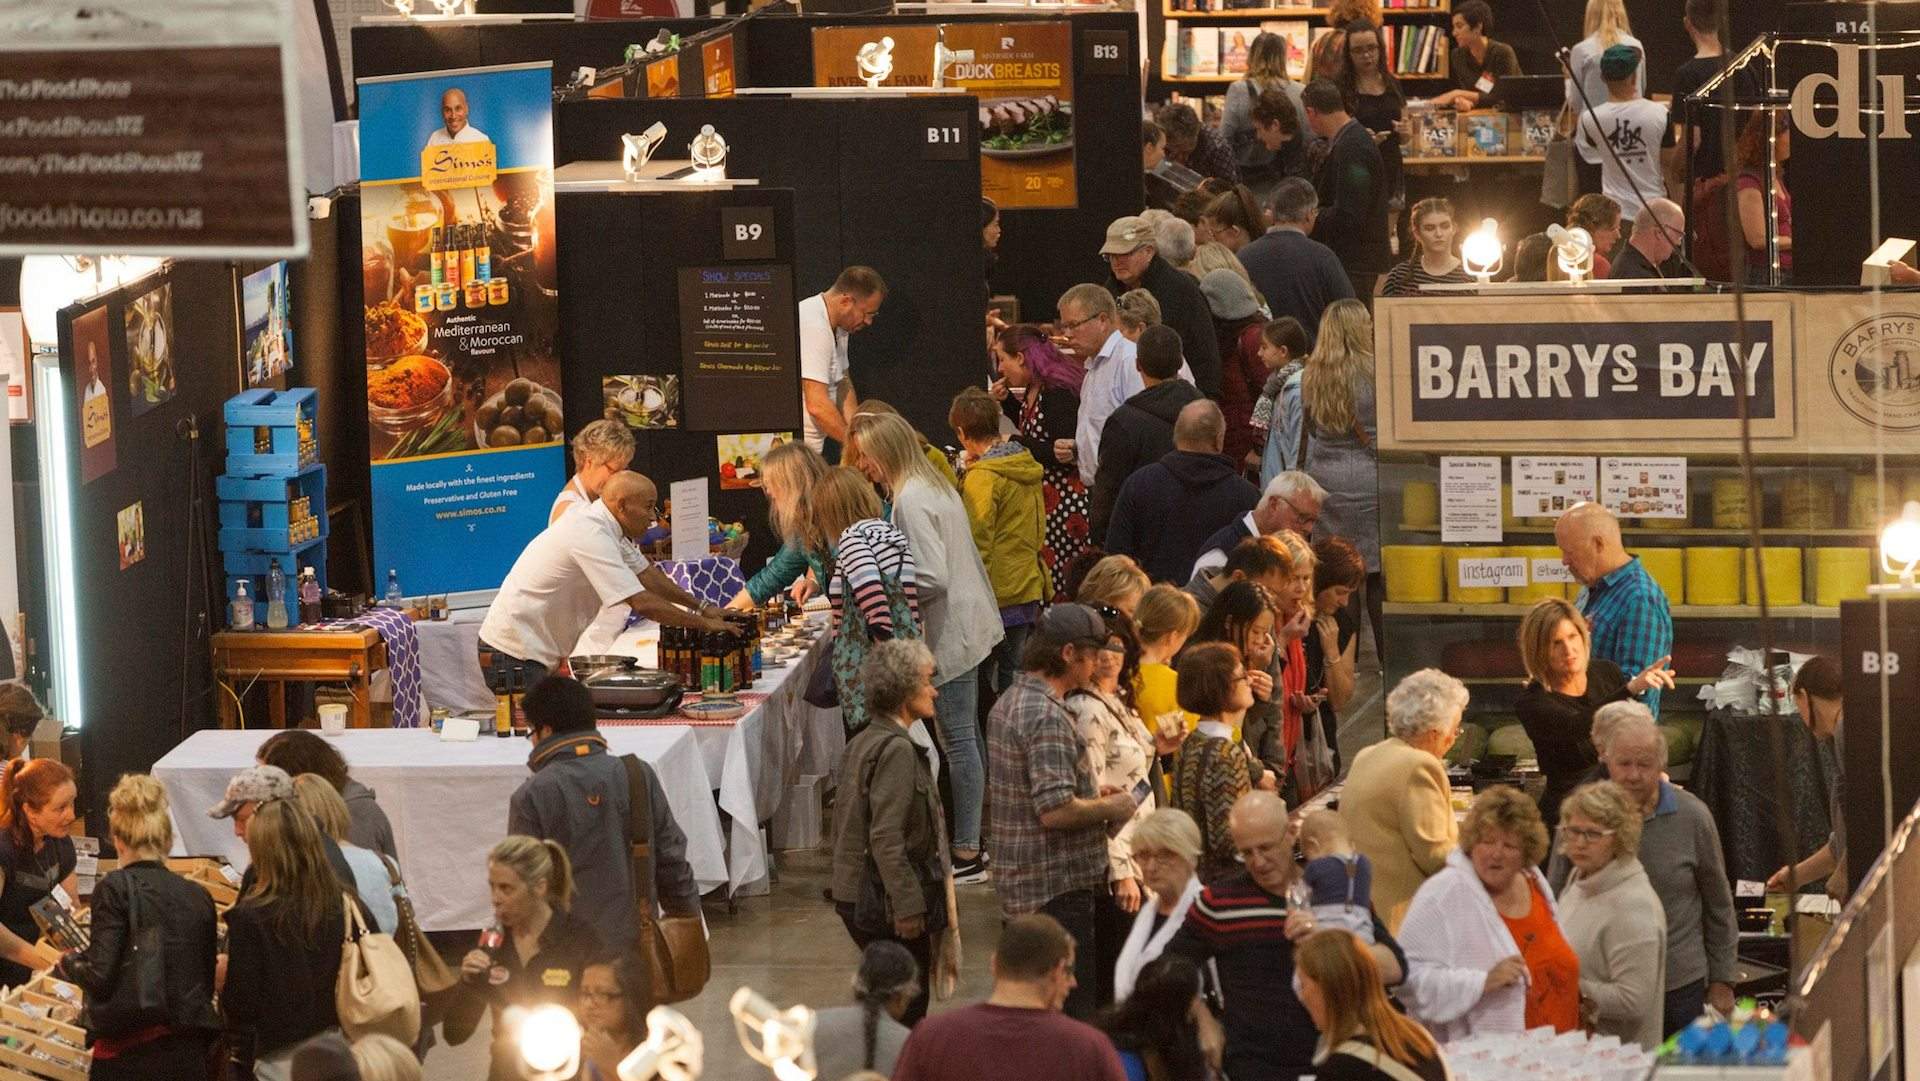 The Auckland Food Show